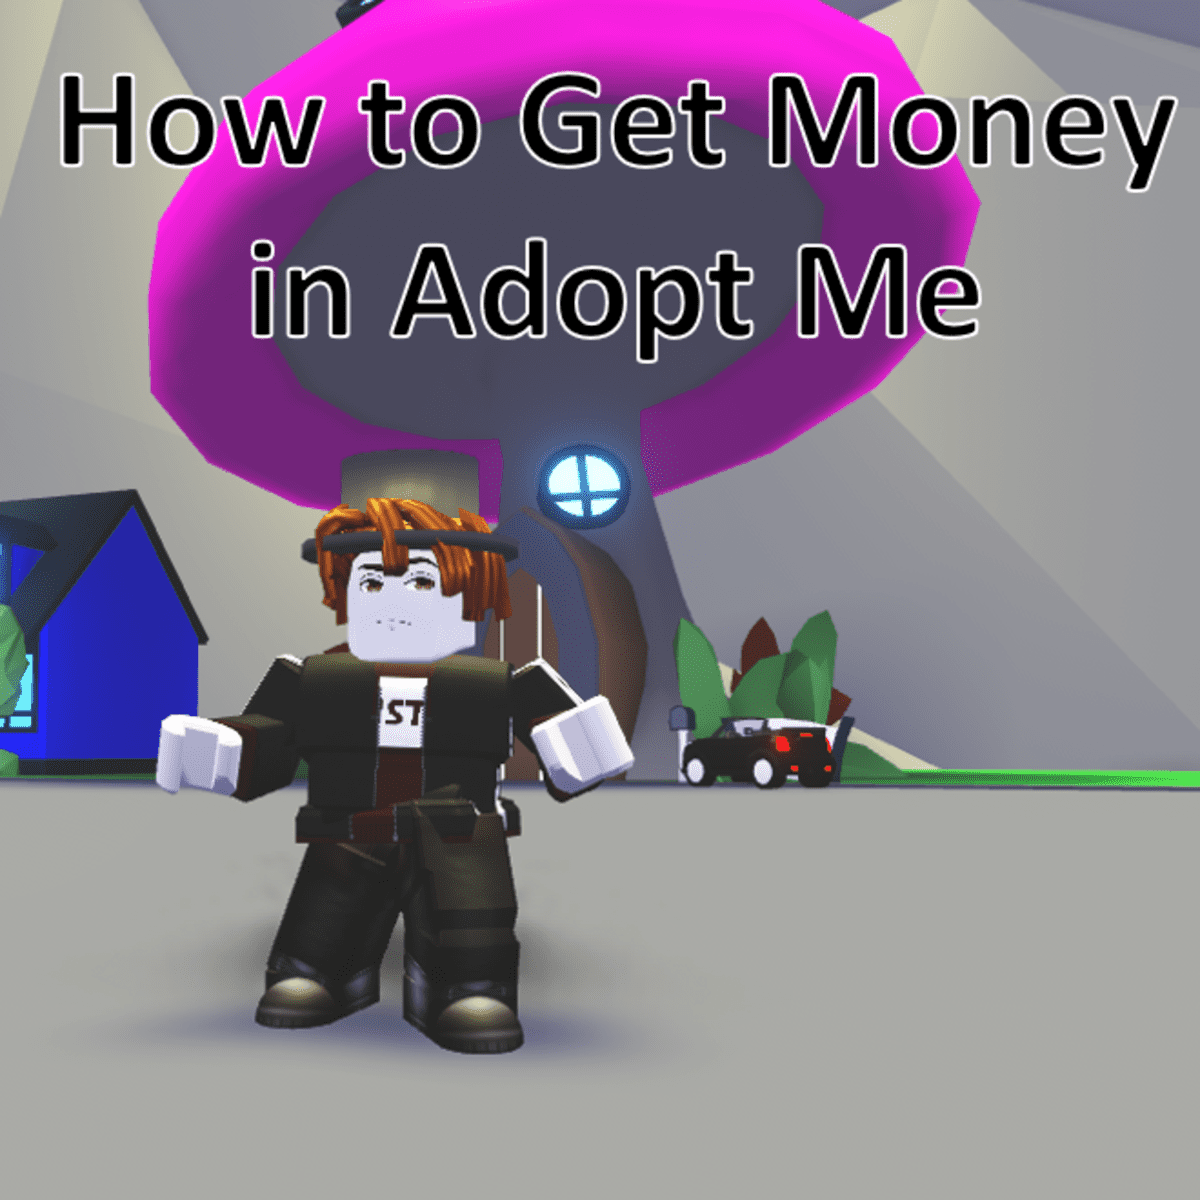 Roblox Adopt Me How To Get Money Levelskip - how to get money on adopt me roblox